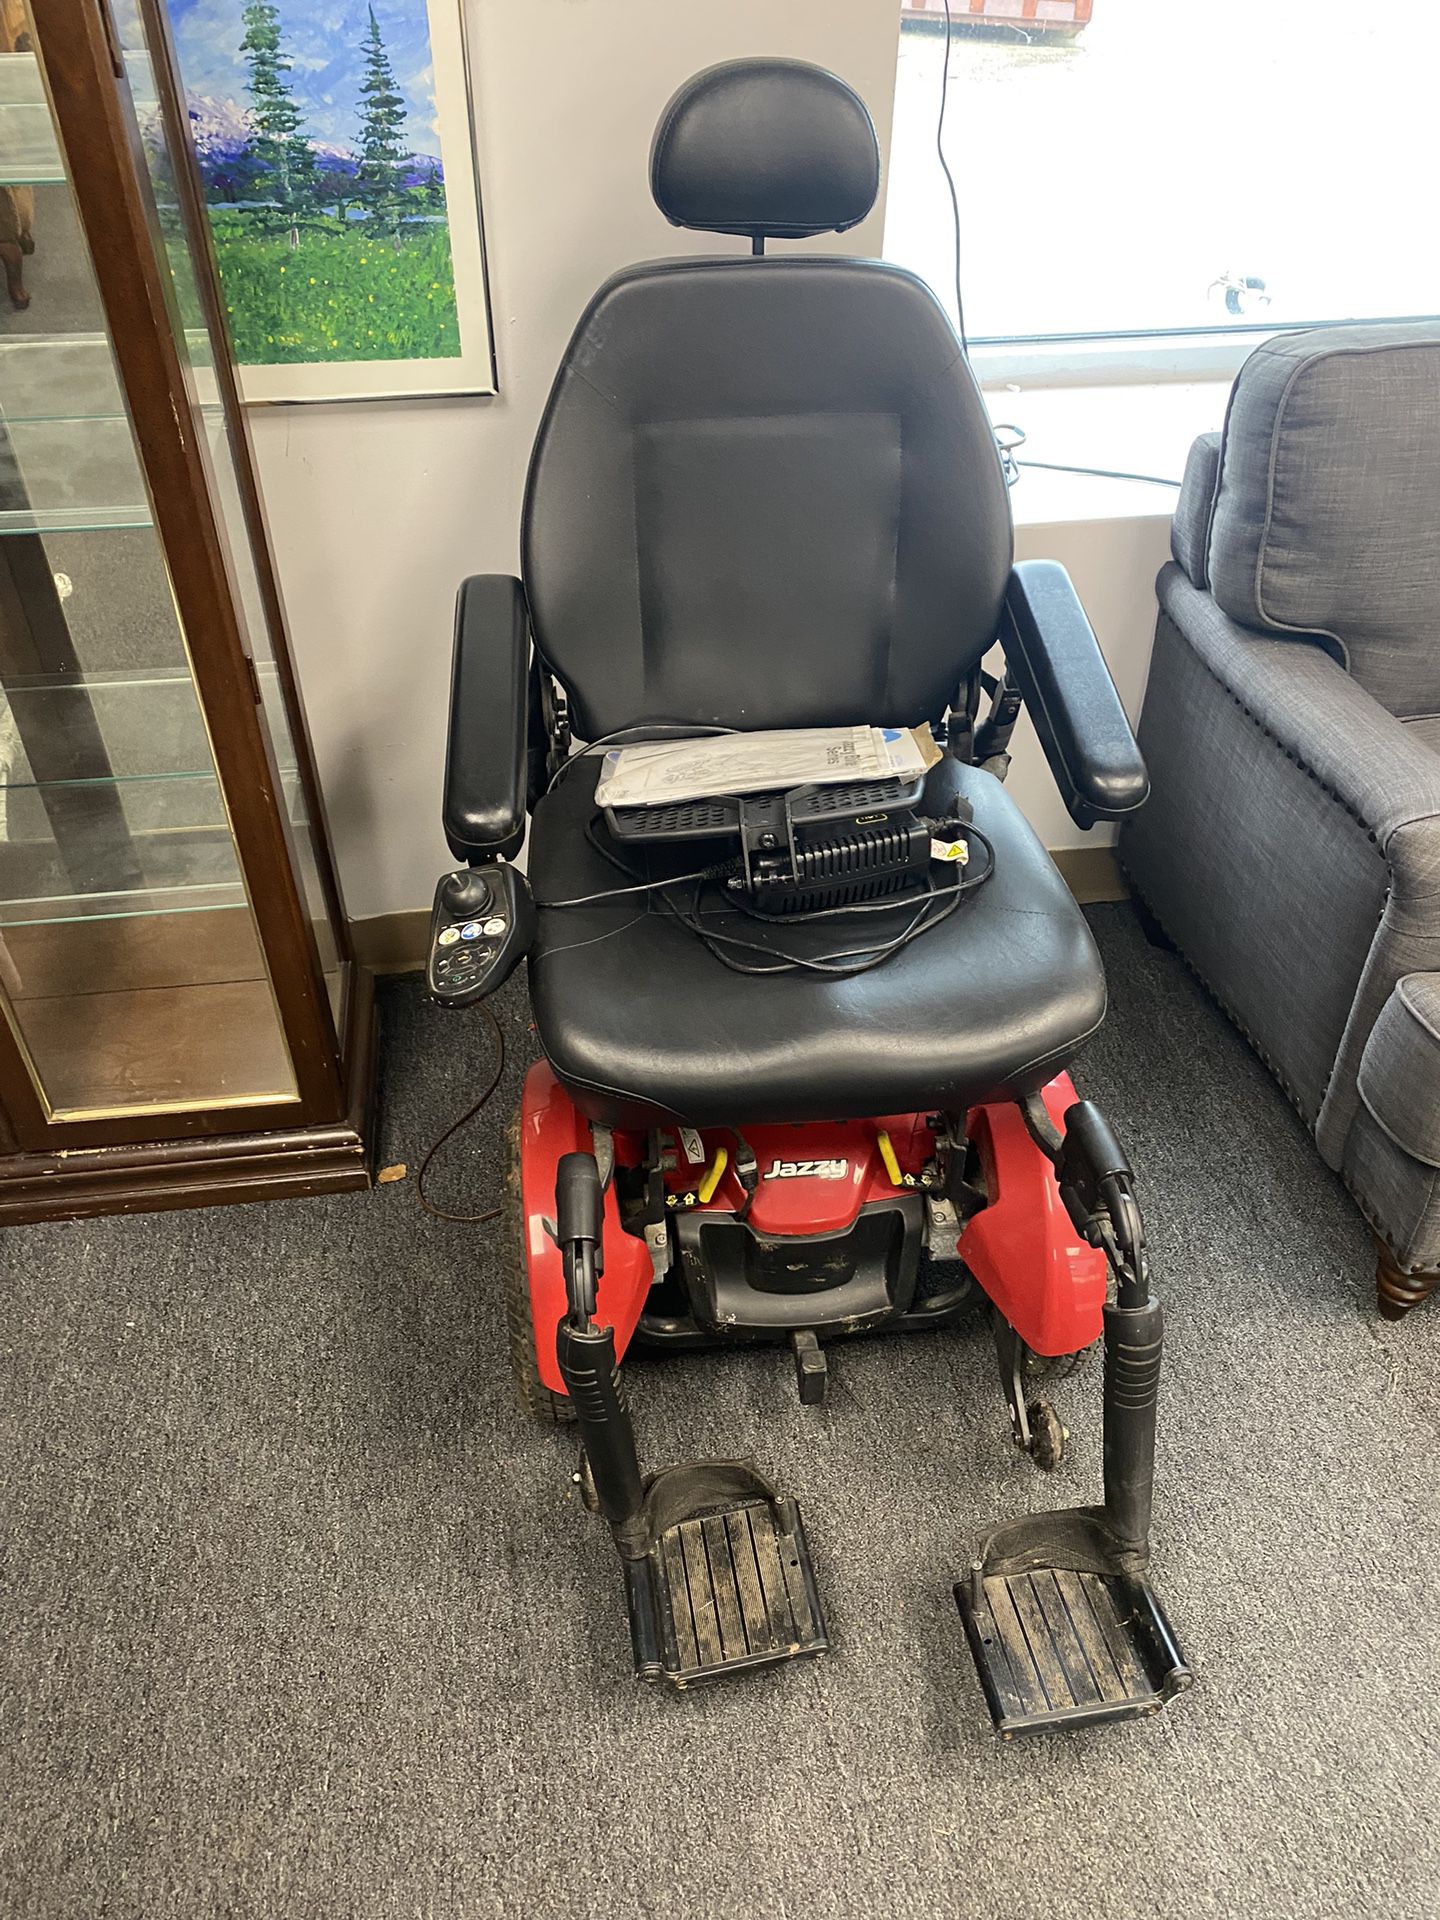 Jazzy Elite Red Mobility Scooter w/Charger & Paperwork $450